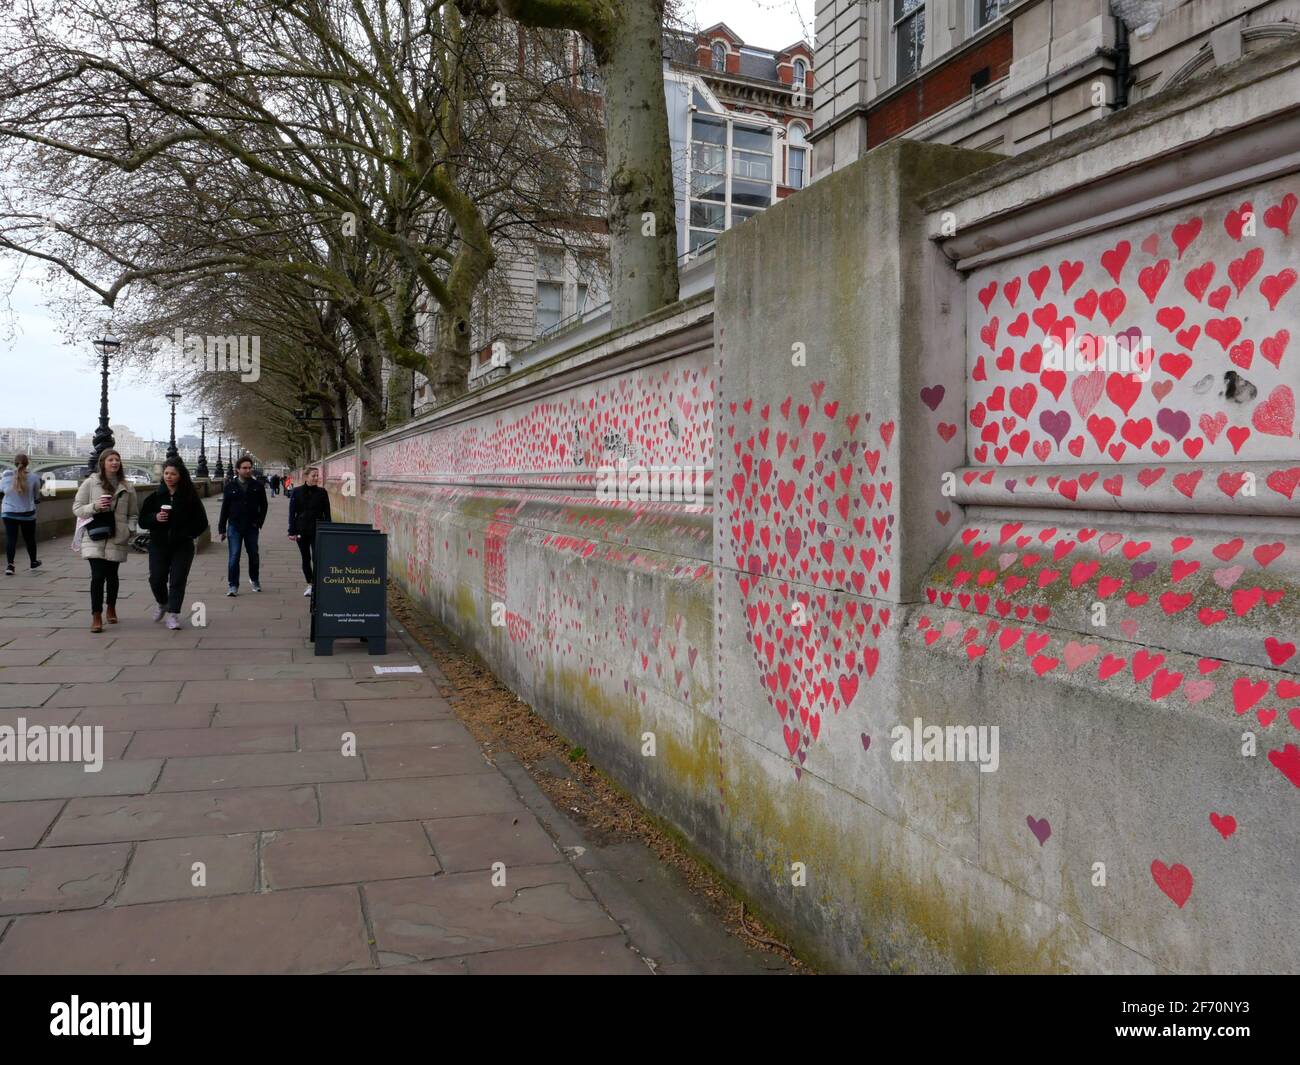 ‘An outpouring of love’ – enormous Covid-19 Memorial Wall begun opposite Parliament London, Monday 29 March– Bereaved families have today begun the creation of a vastCovid-19 Memorial Wall, on the Embankment opposite the Houses of Parliament in Westminster, London.Painting individual red hearts for each of the more than 145,000 lives lost to the virus, the group hopes to put personal stories at the heart of the Government’s approach to learning lessons from  the pandemic and expects the wall to stretch to  over half a kilometre in the coming days. Stock Photo